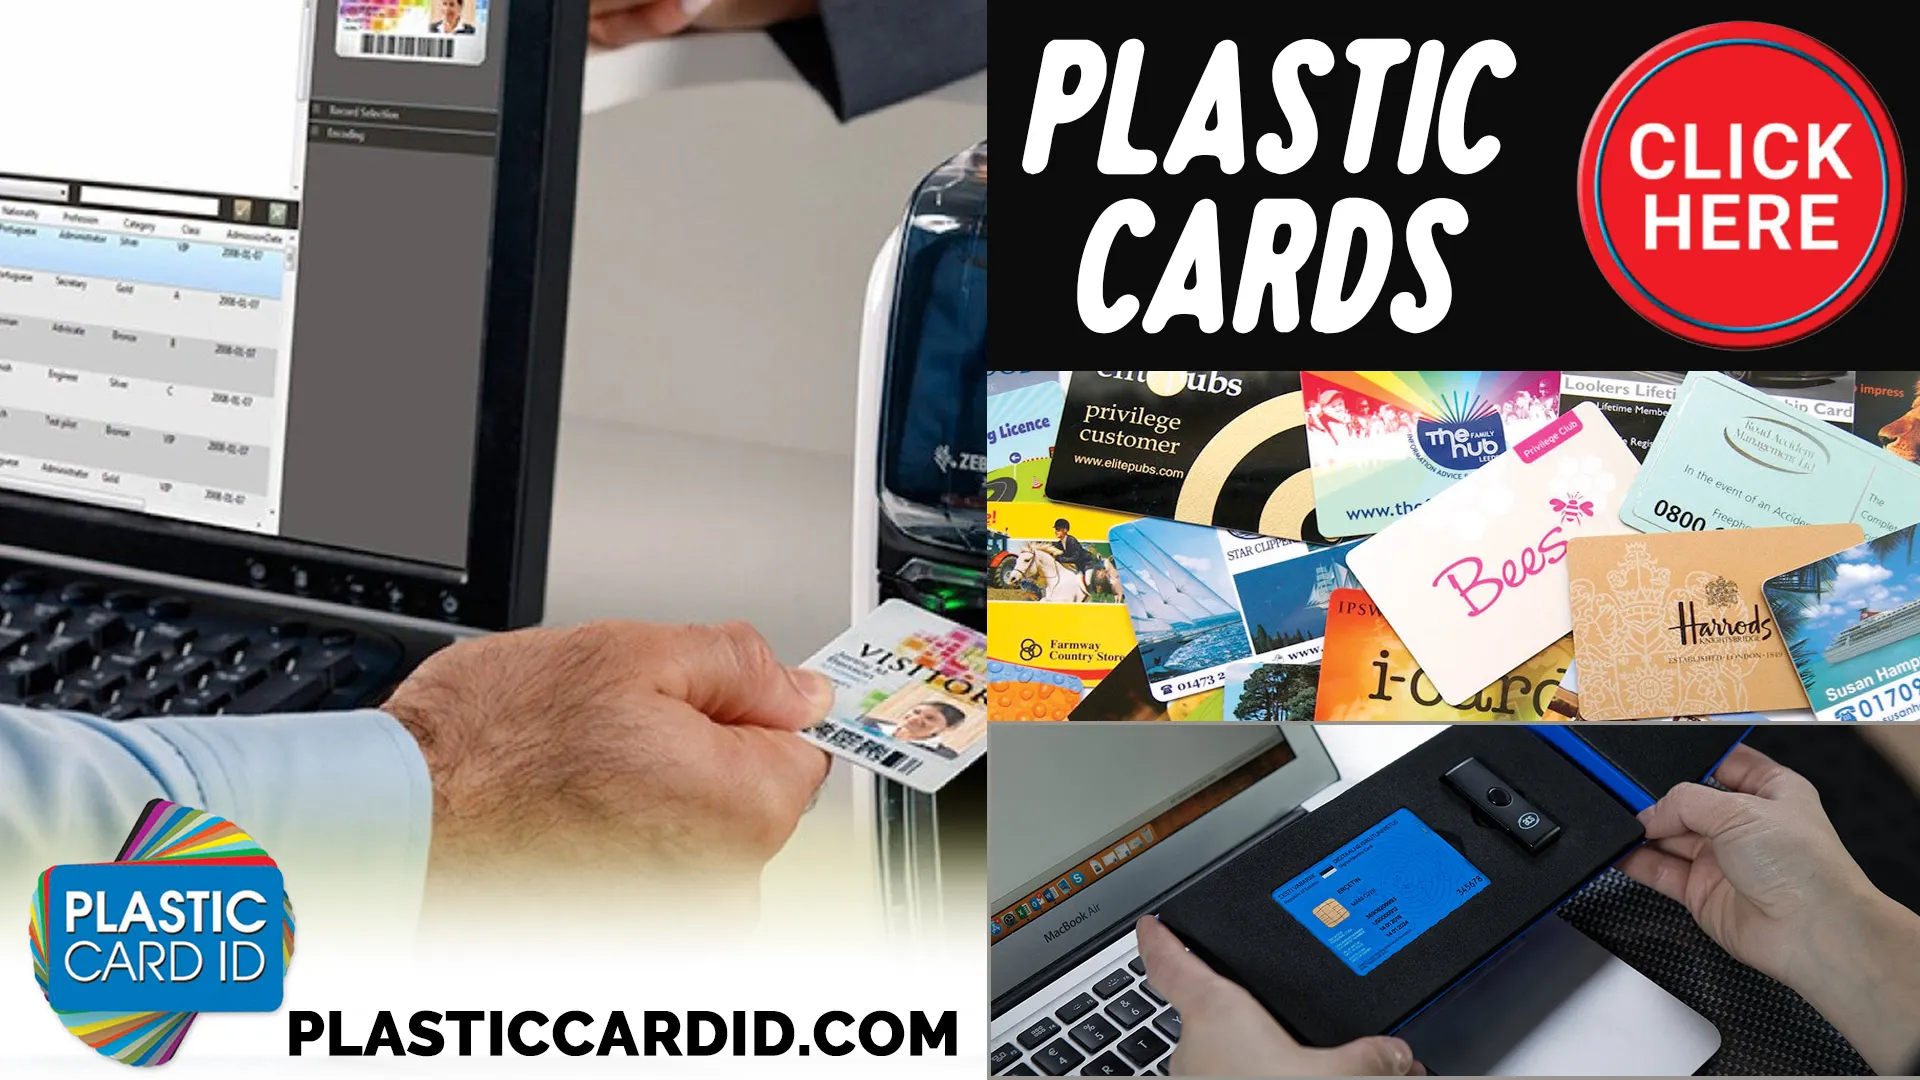 Card Printer Solutions For Every Need